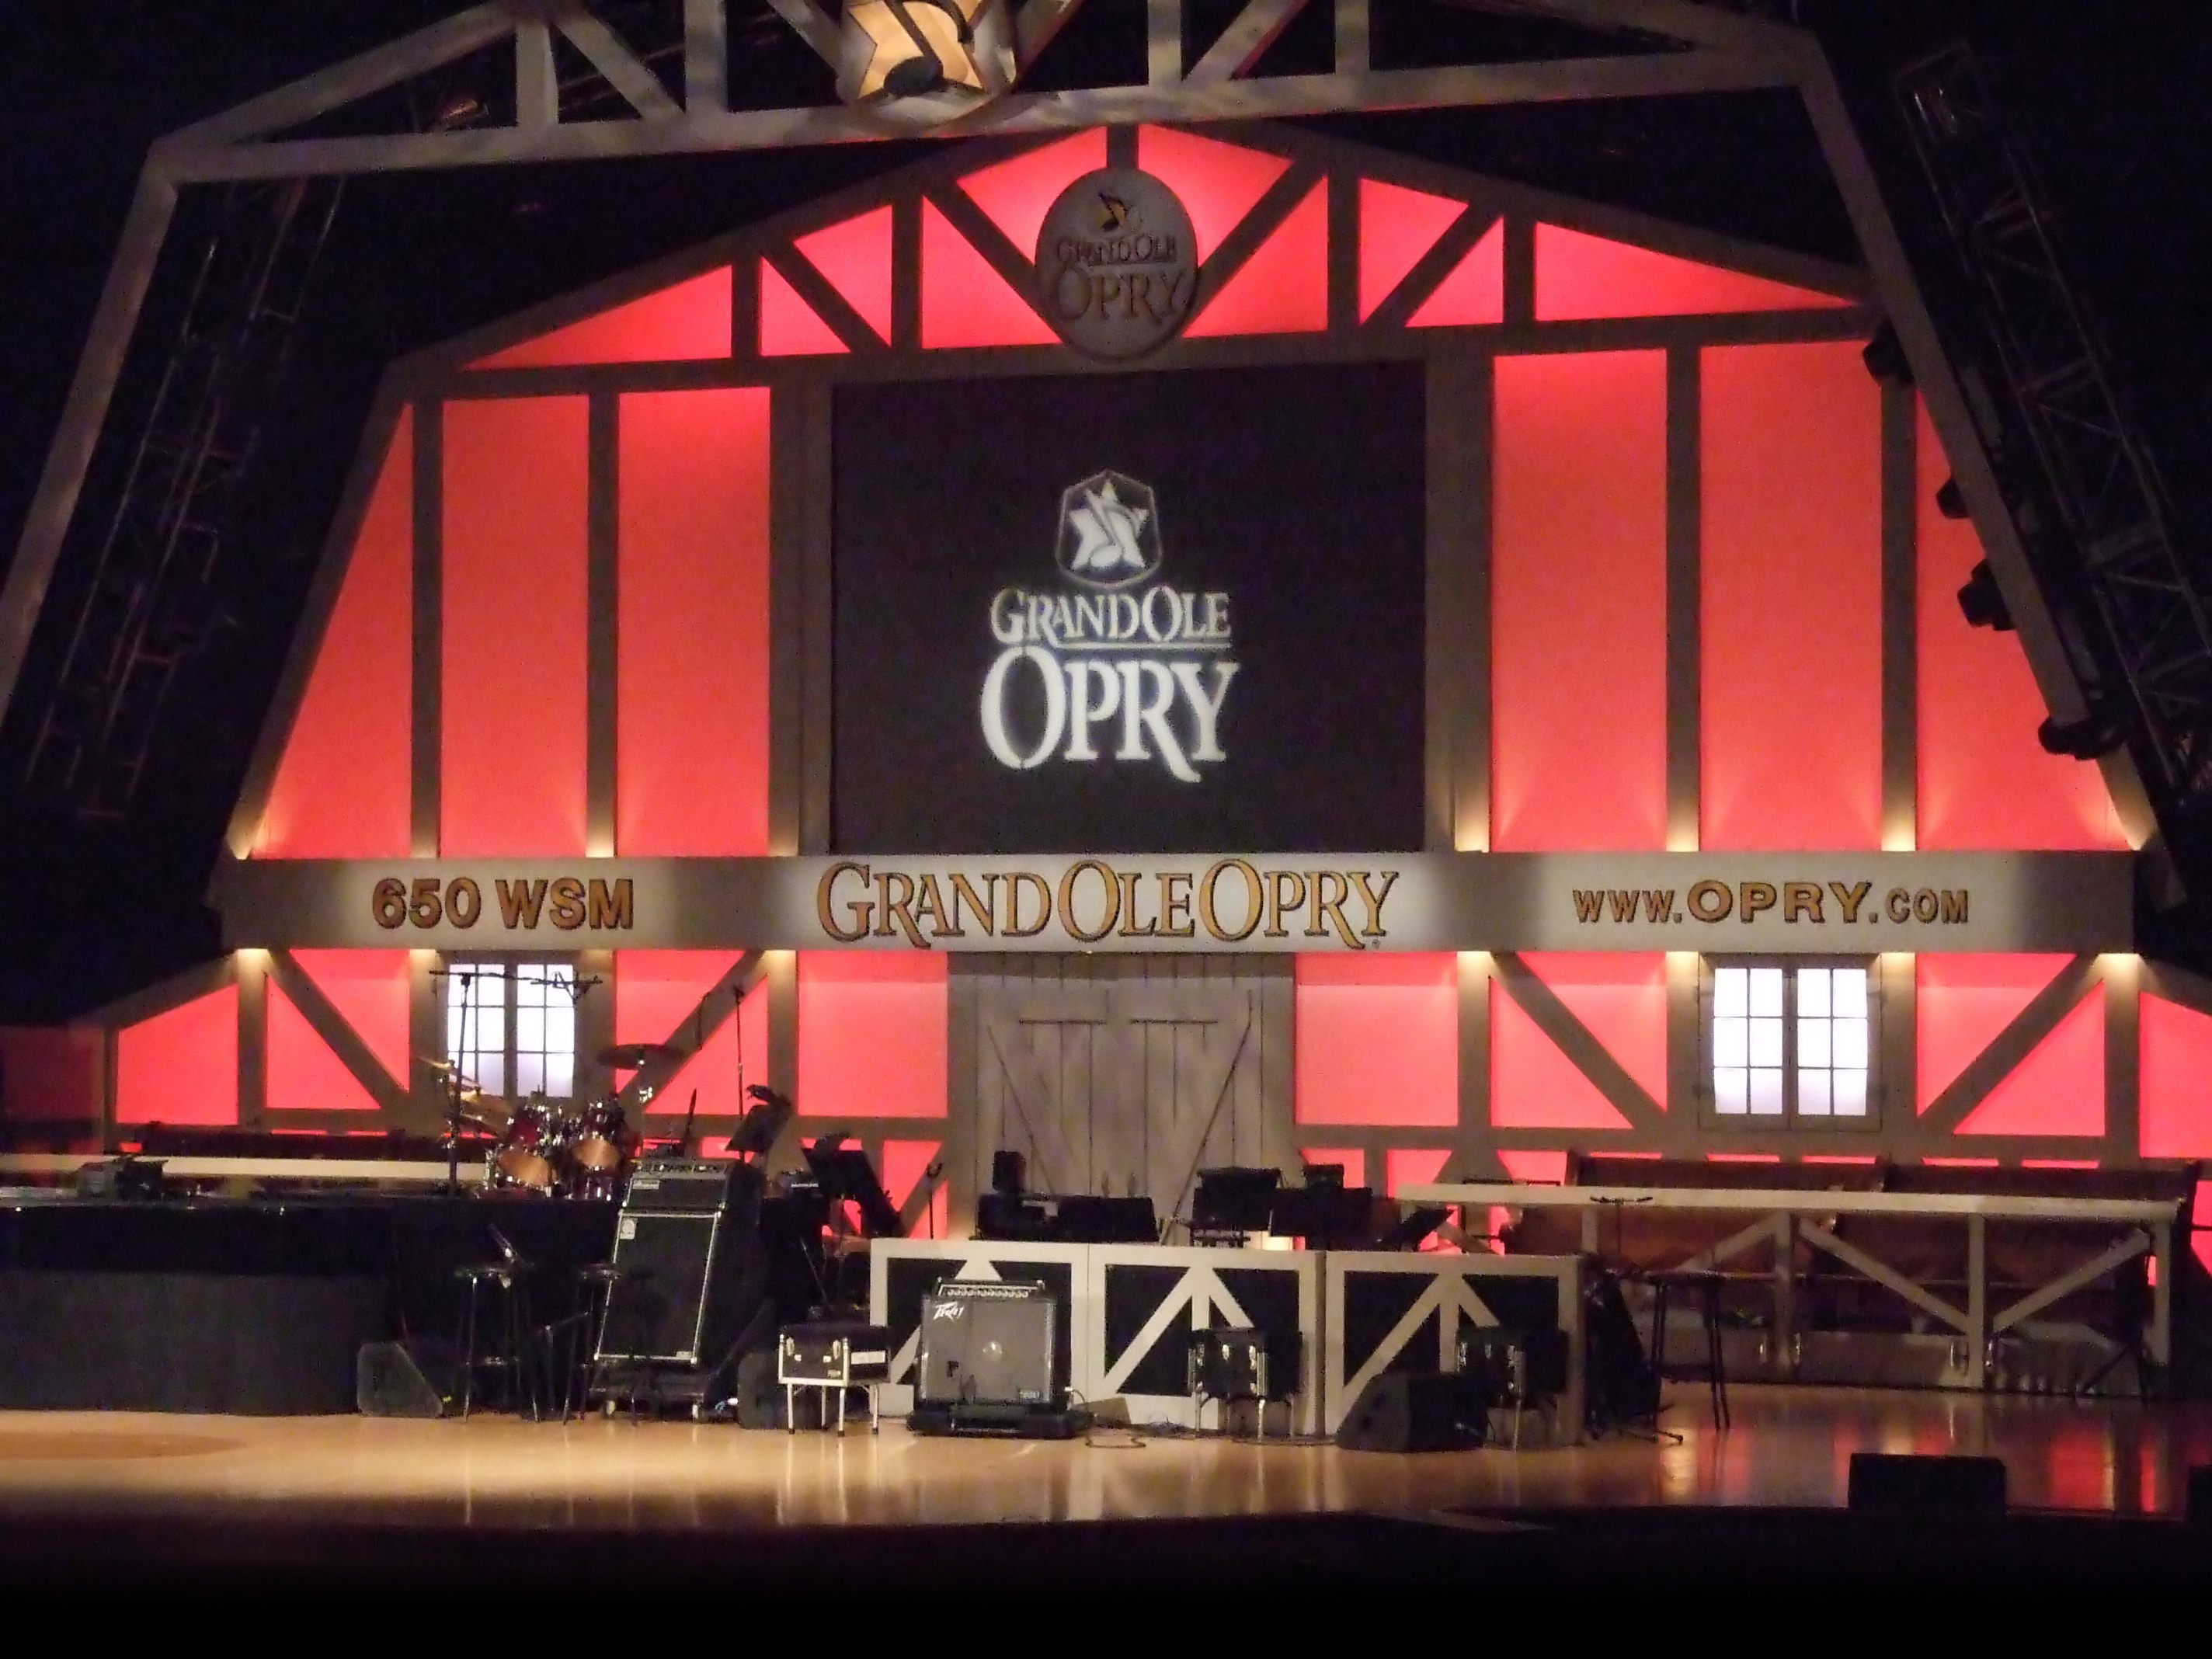 Consider These Music Cities for Your Next Family Vacation - Grand Ole Opry in Nashville